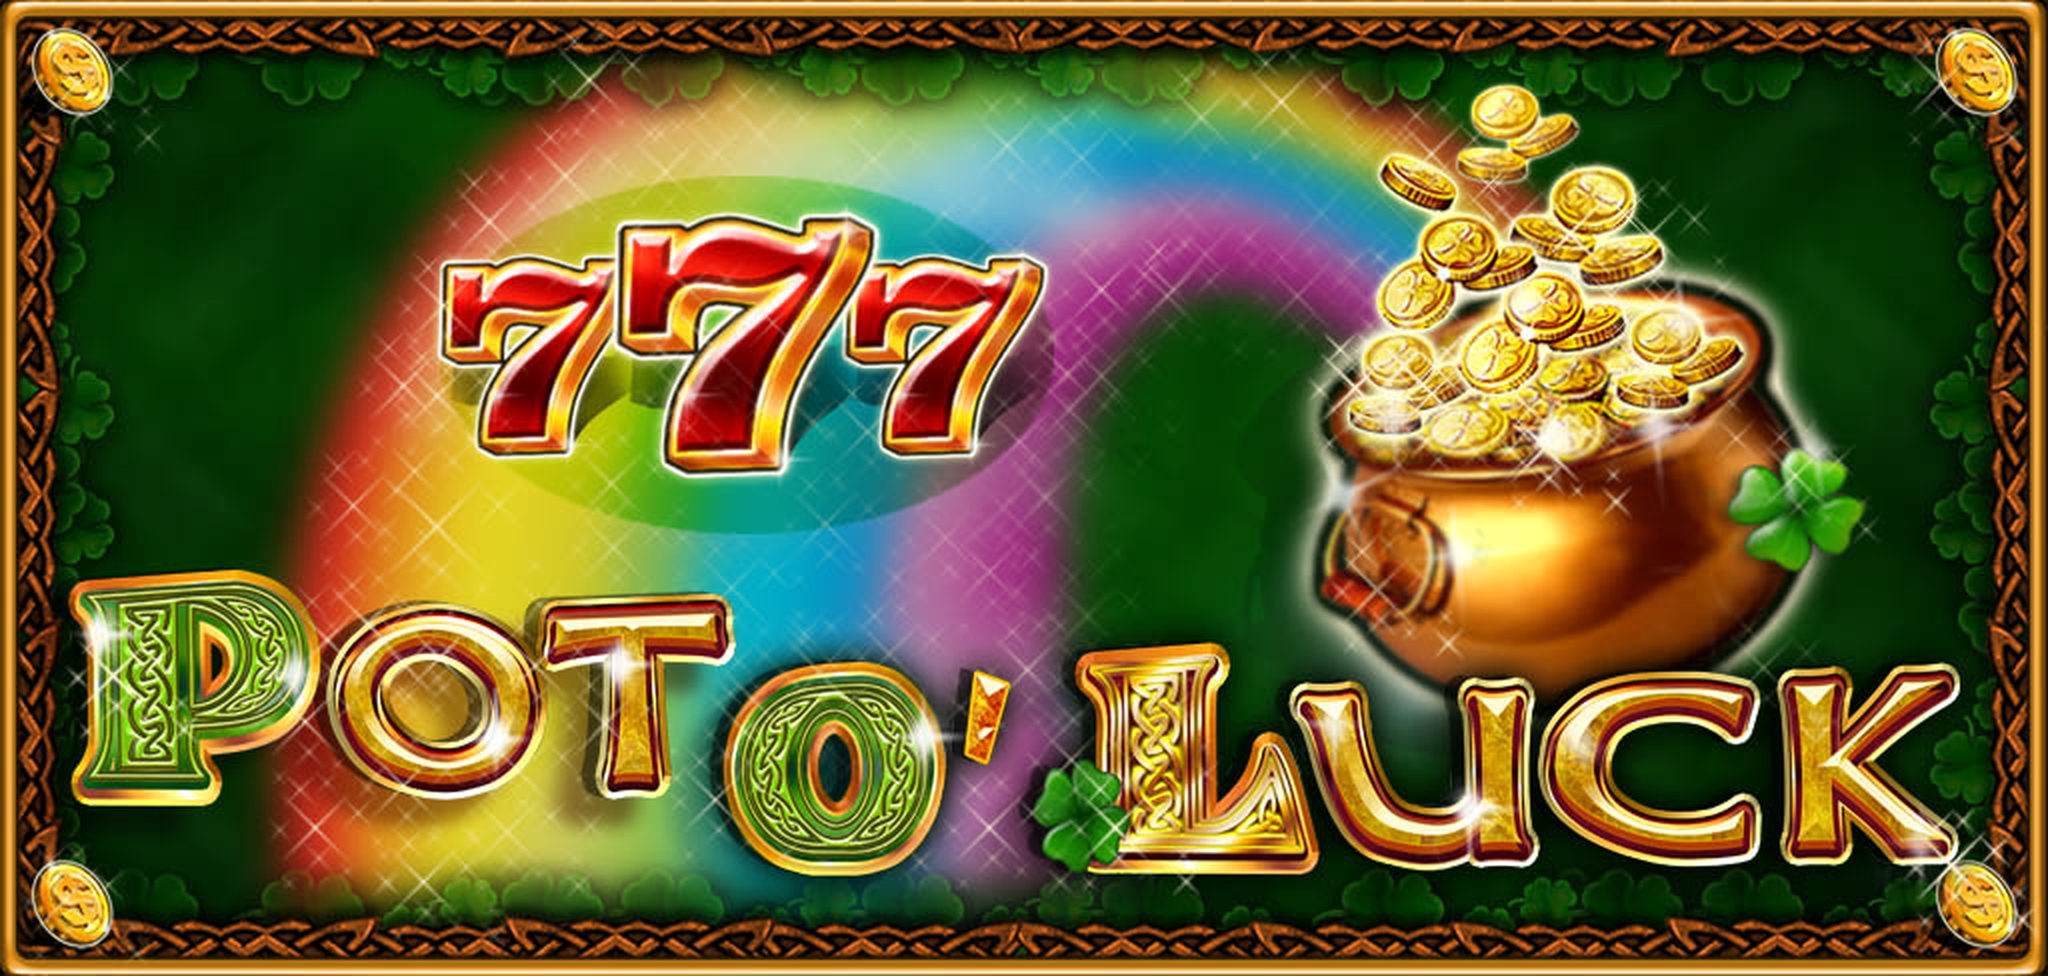 The Pot o' Luck Online Slot Demo Game by casino technology